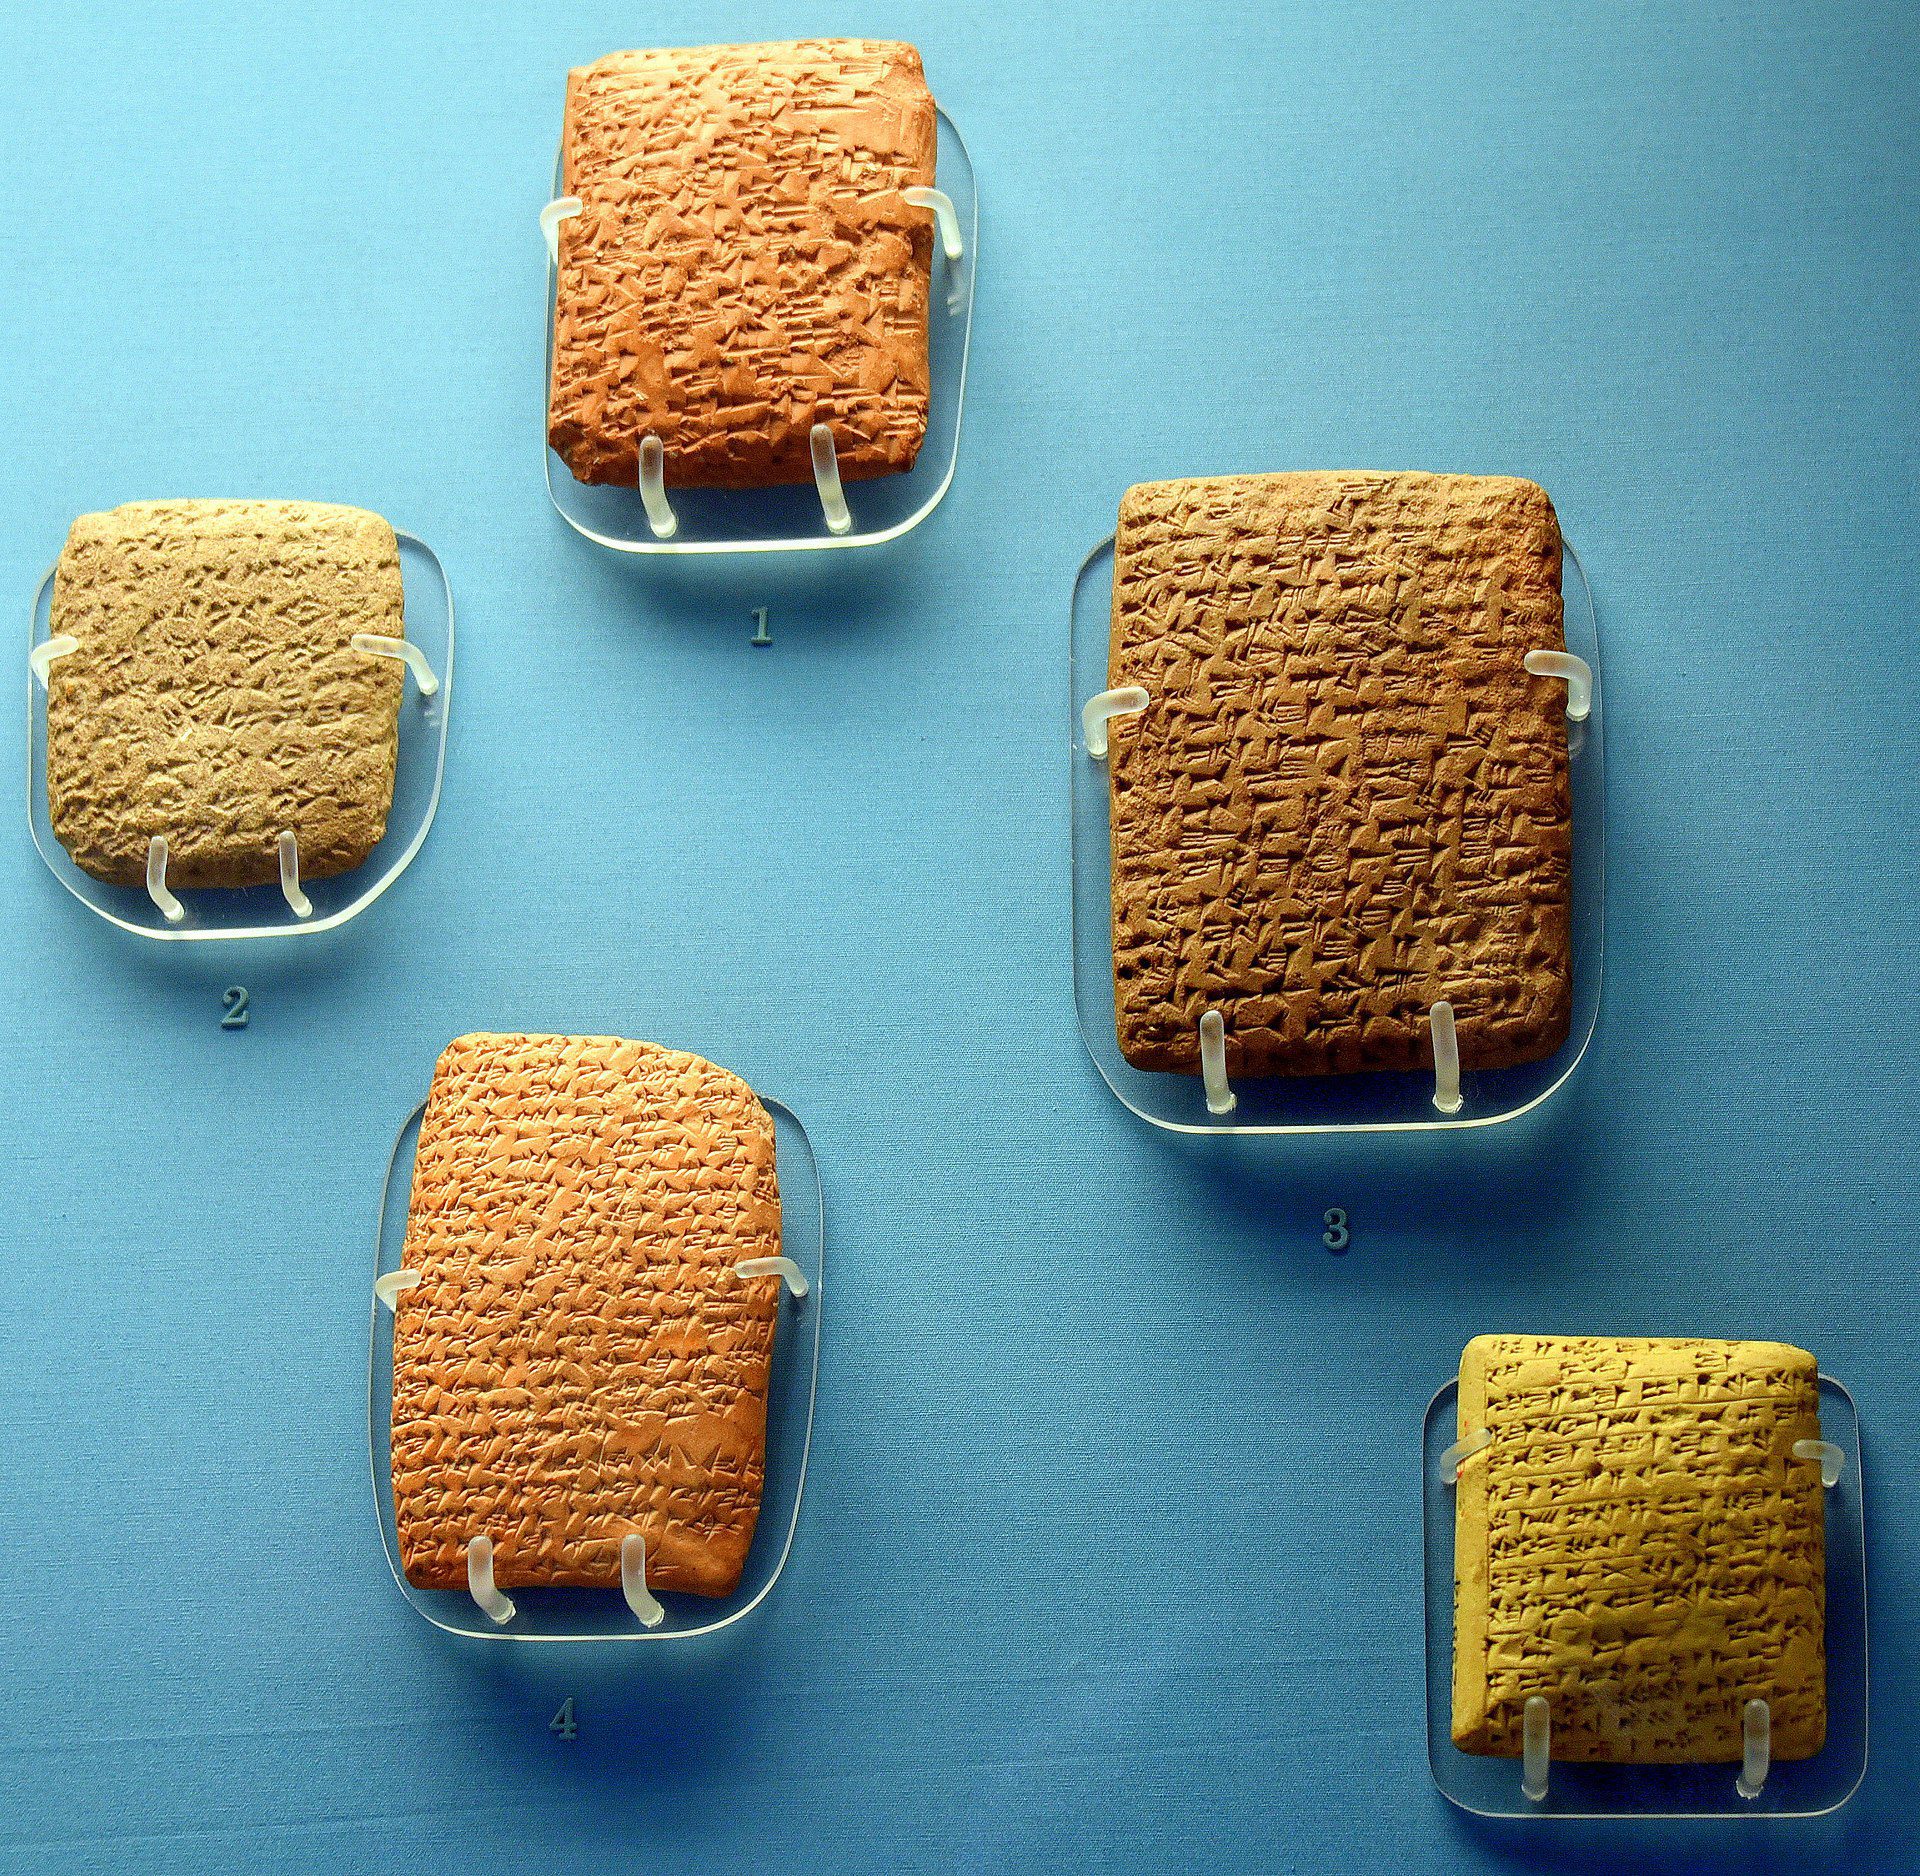 The Amarna Letters, present an archive written on clay tablets primarily consisting of diplomatic correspondence between the Egyptian administration and the leaders of neighbouring kingdoms.